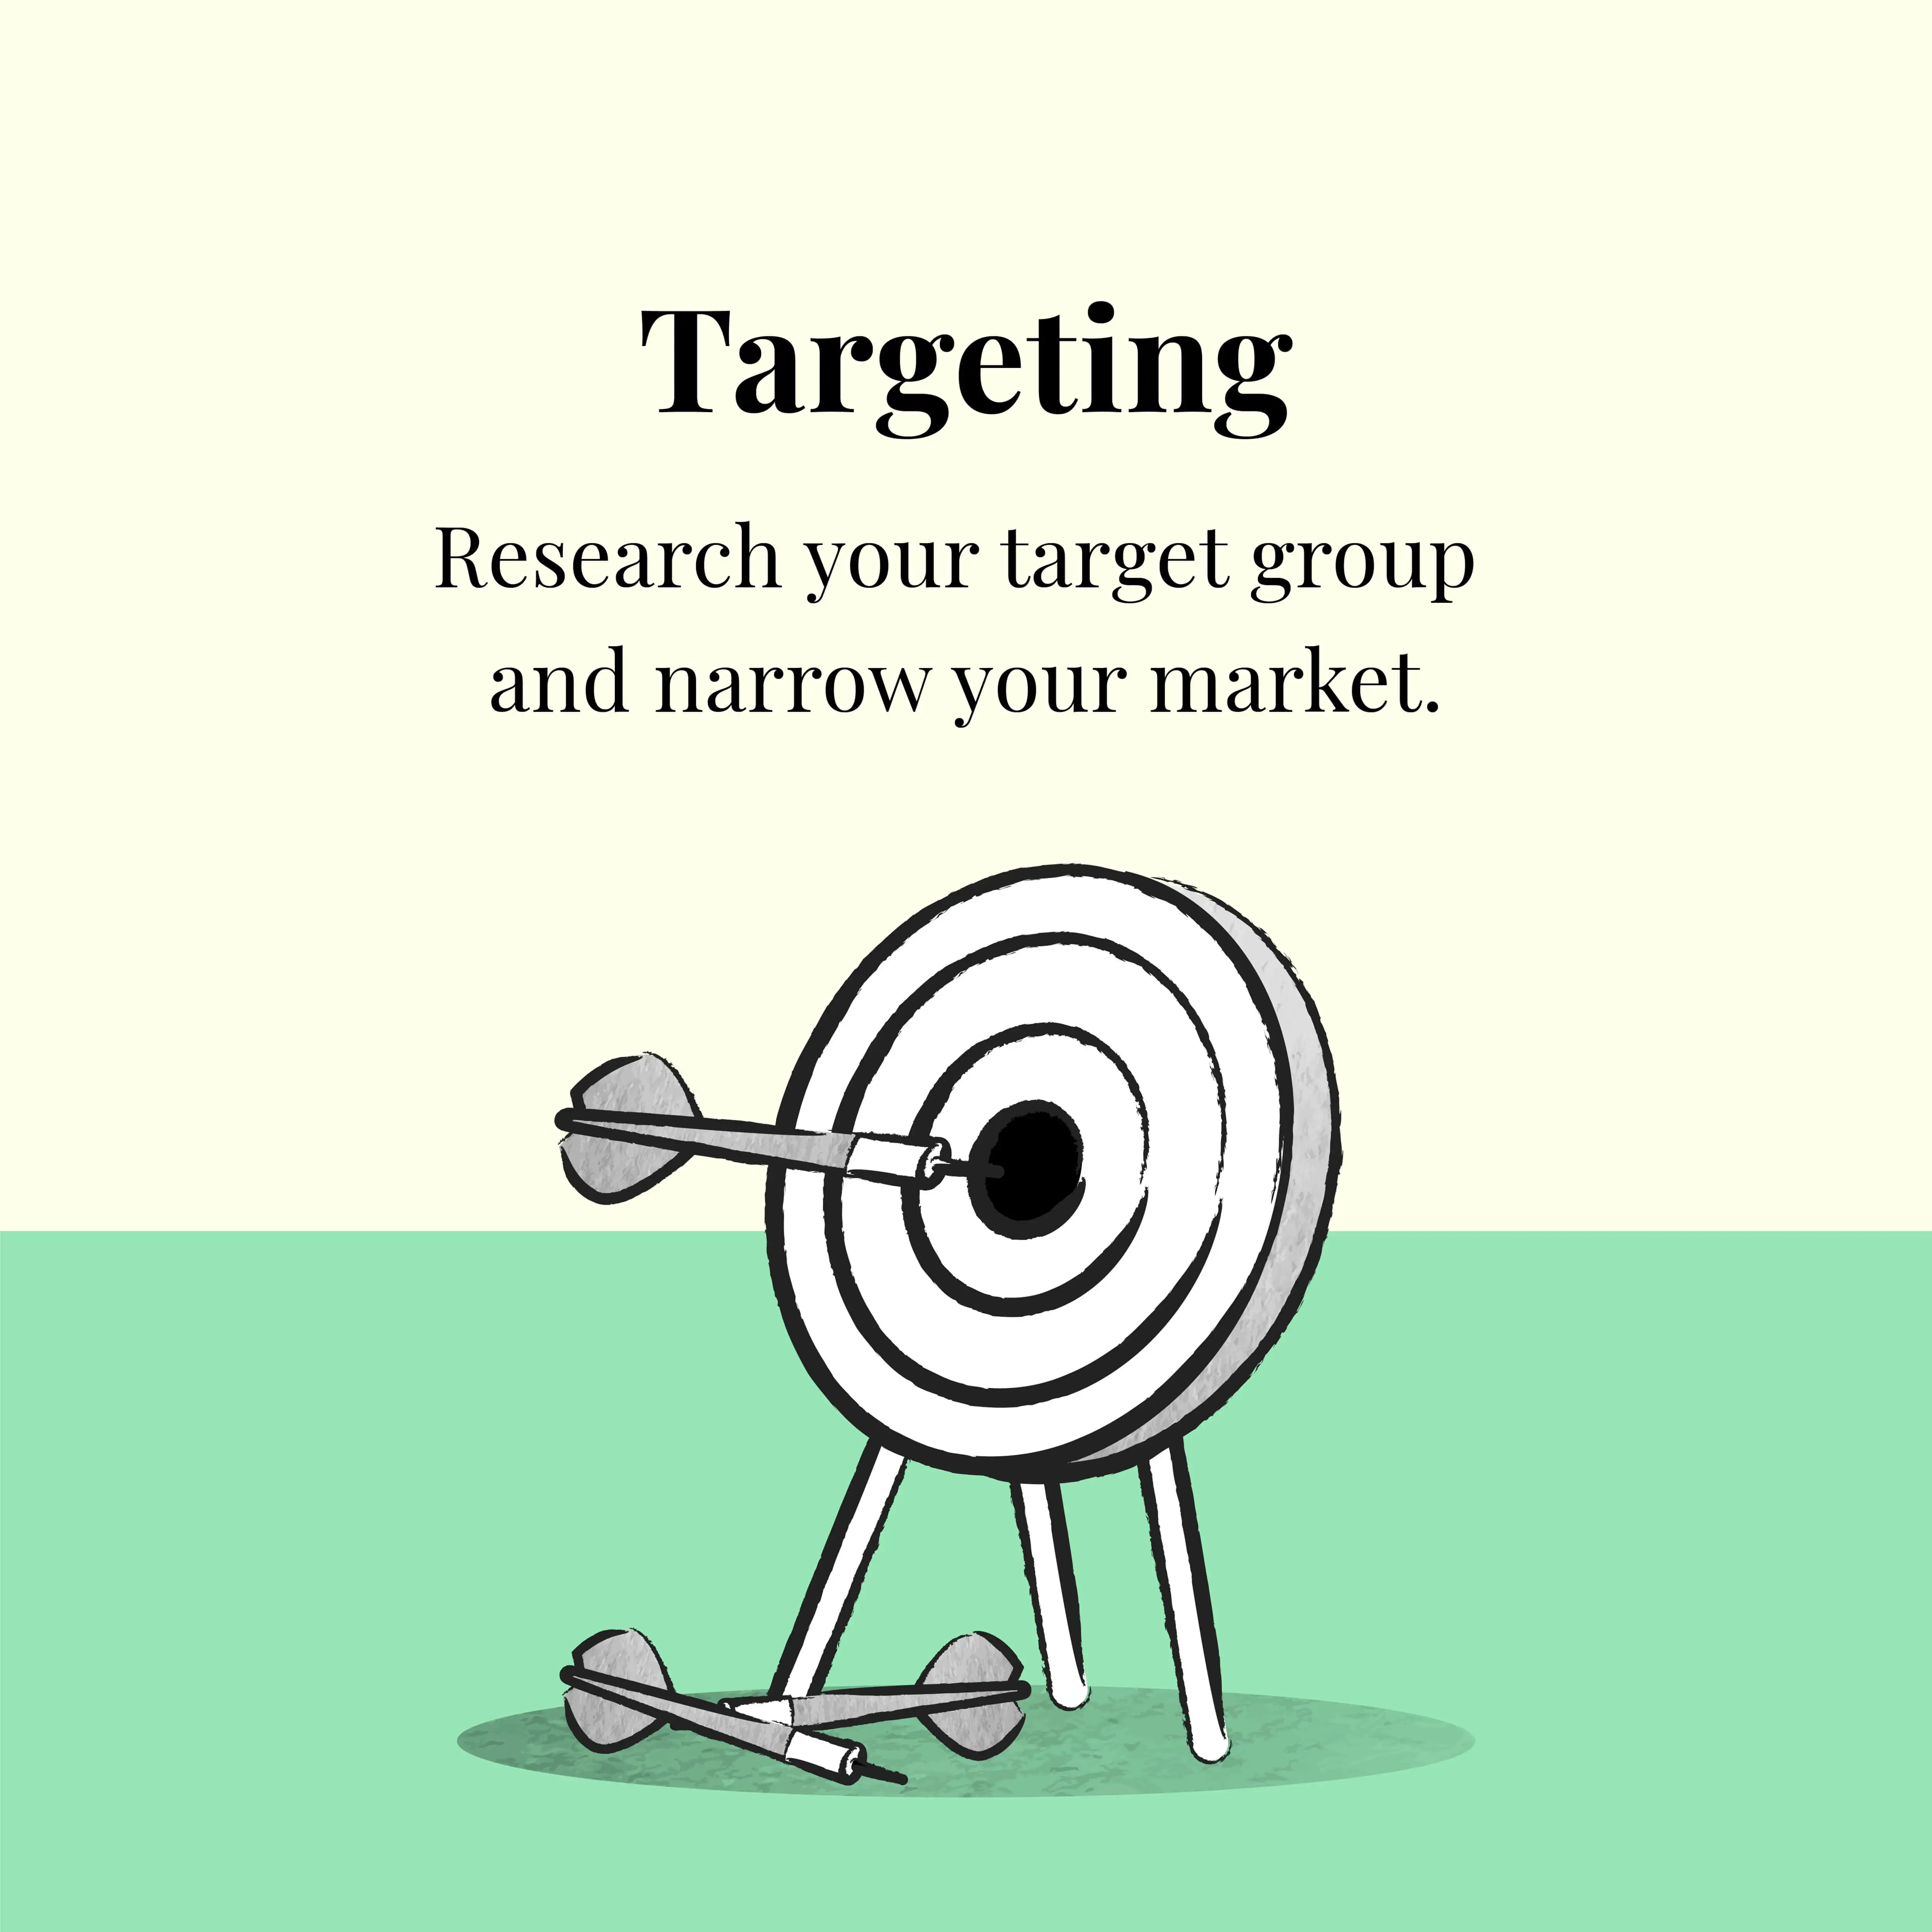 Research your target group